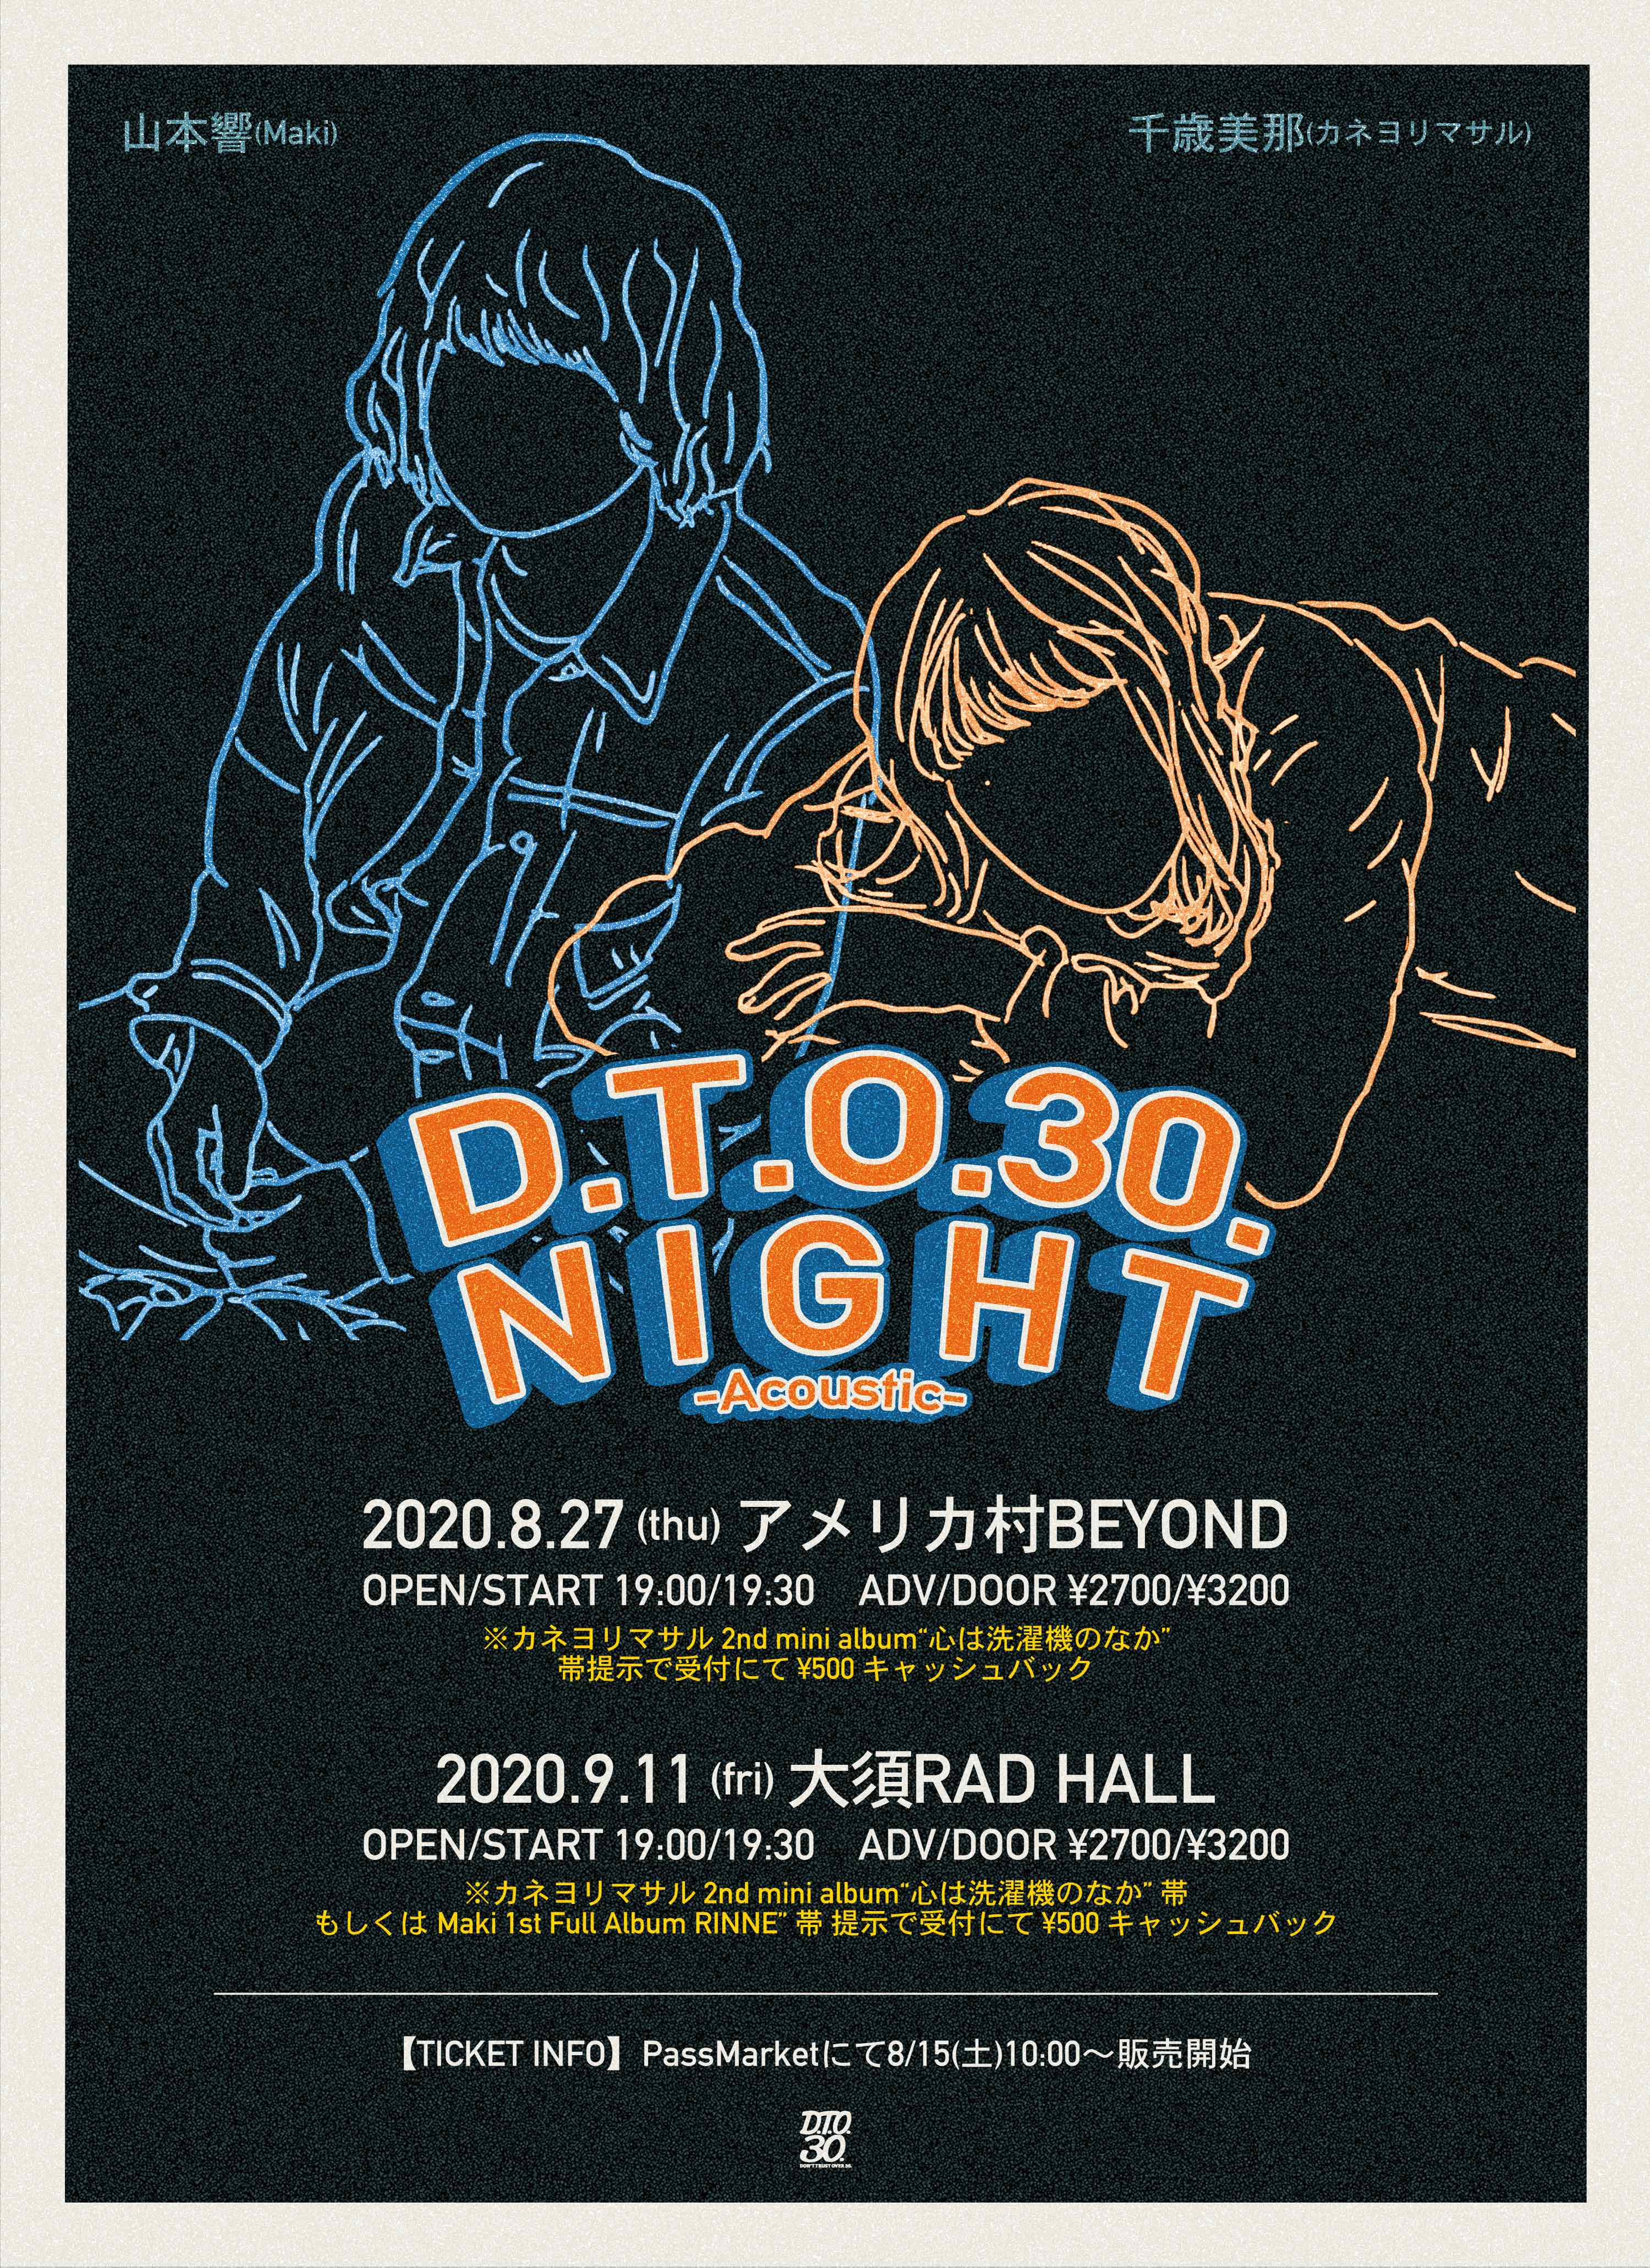 D.T.O.30. NIGHT -Acoustic-